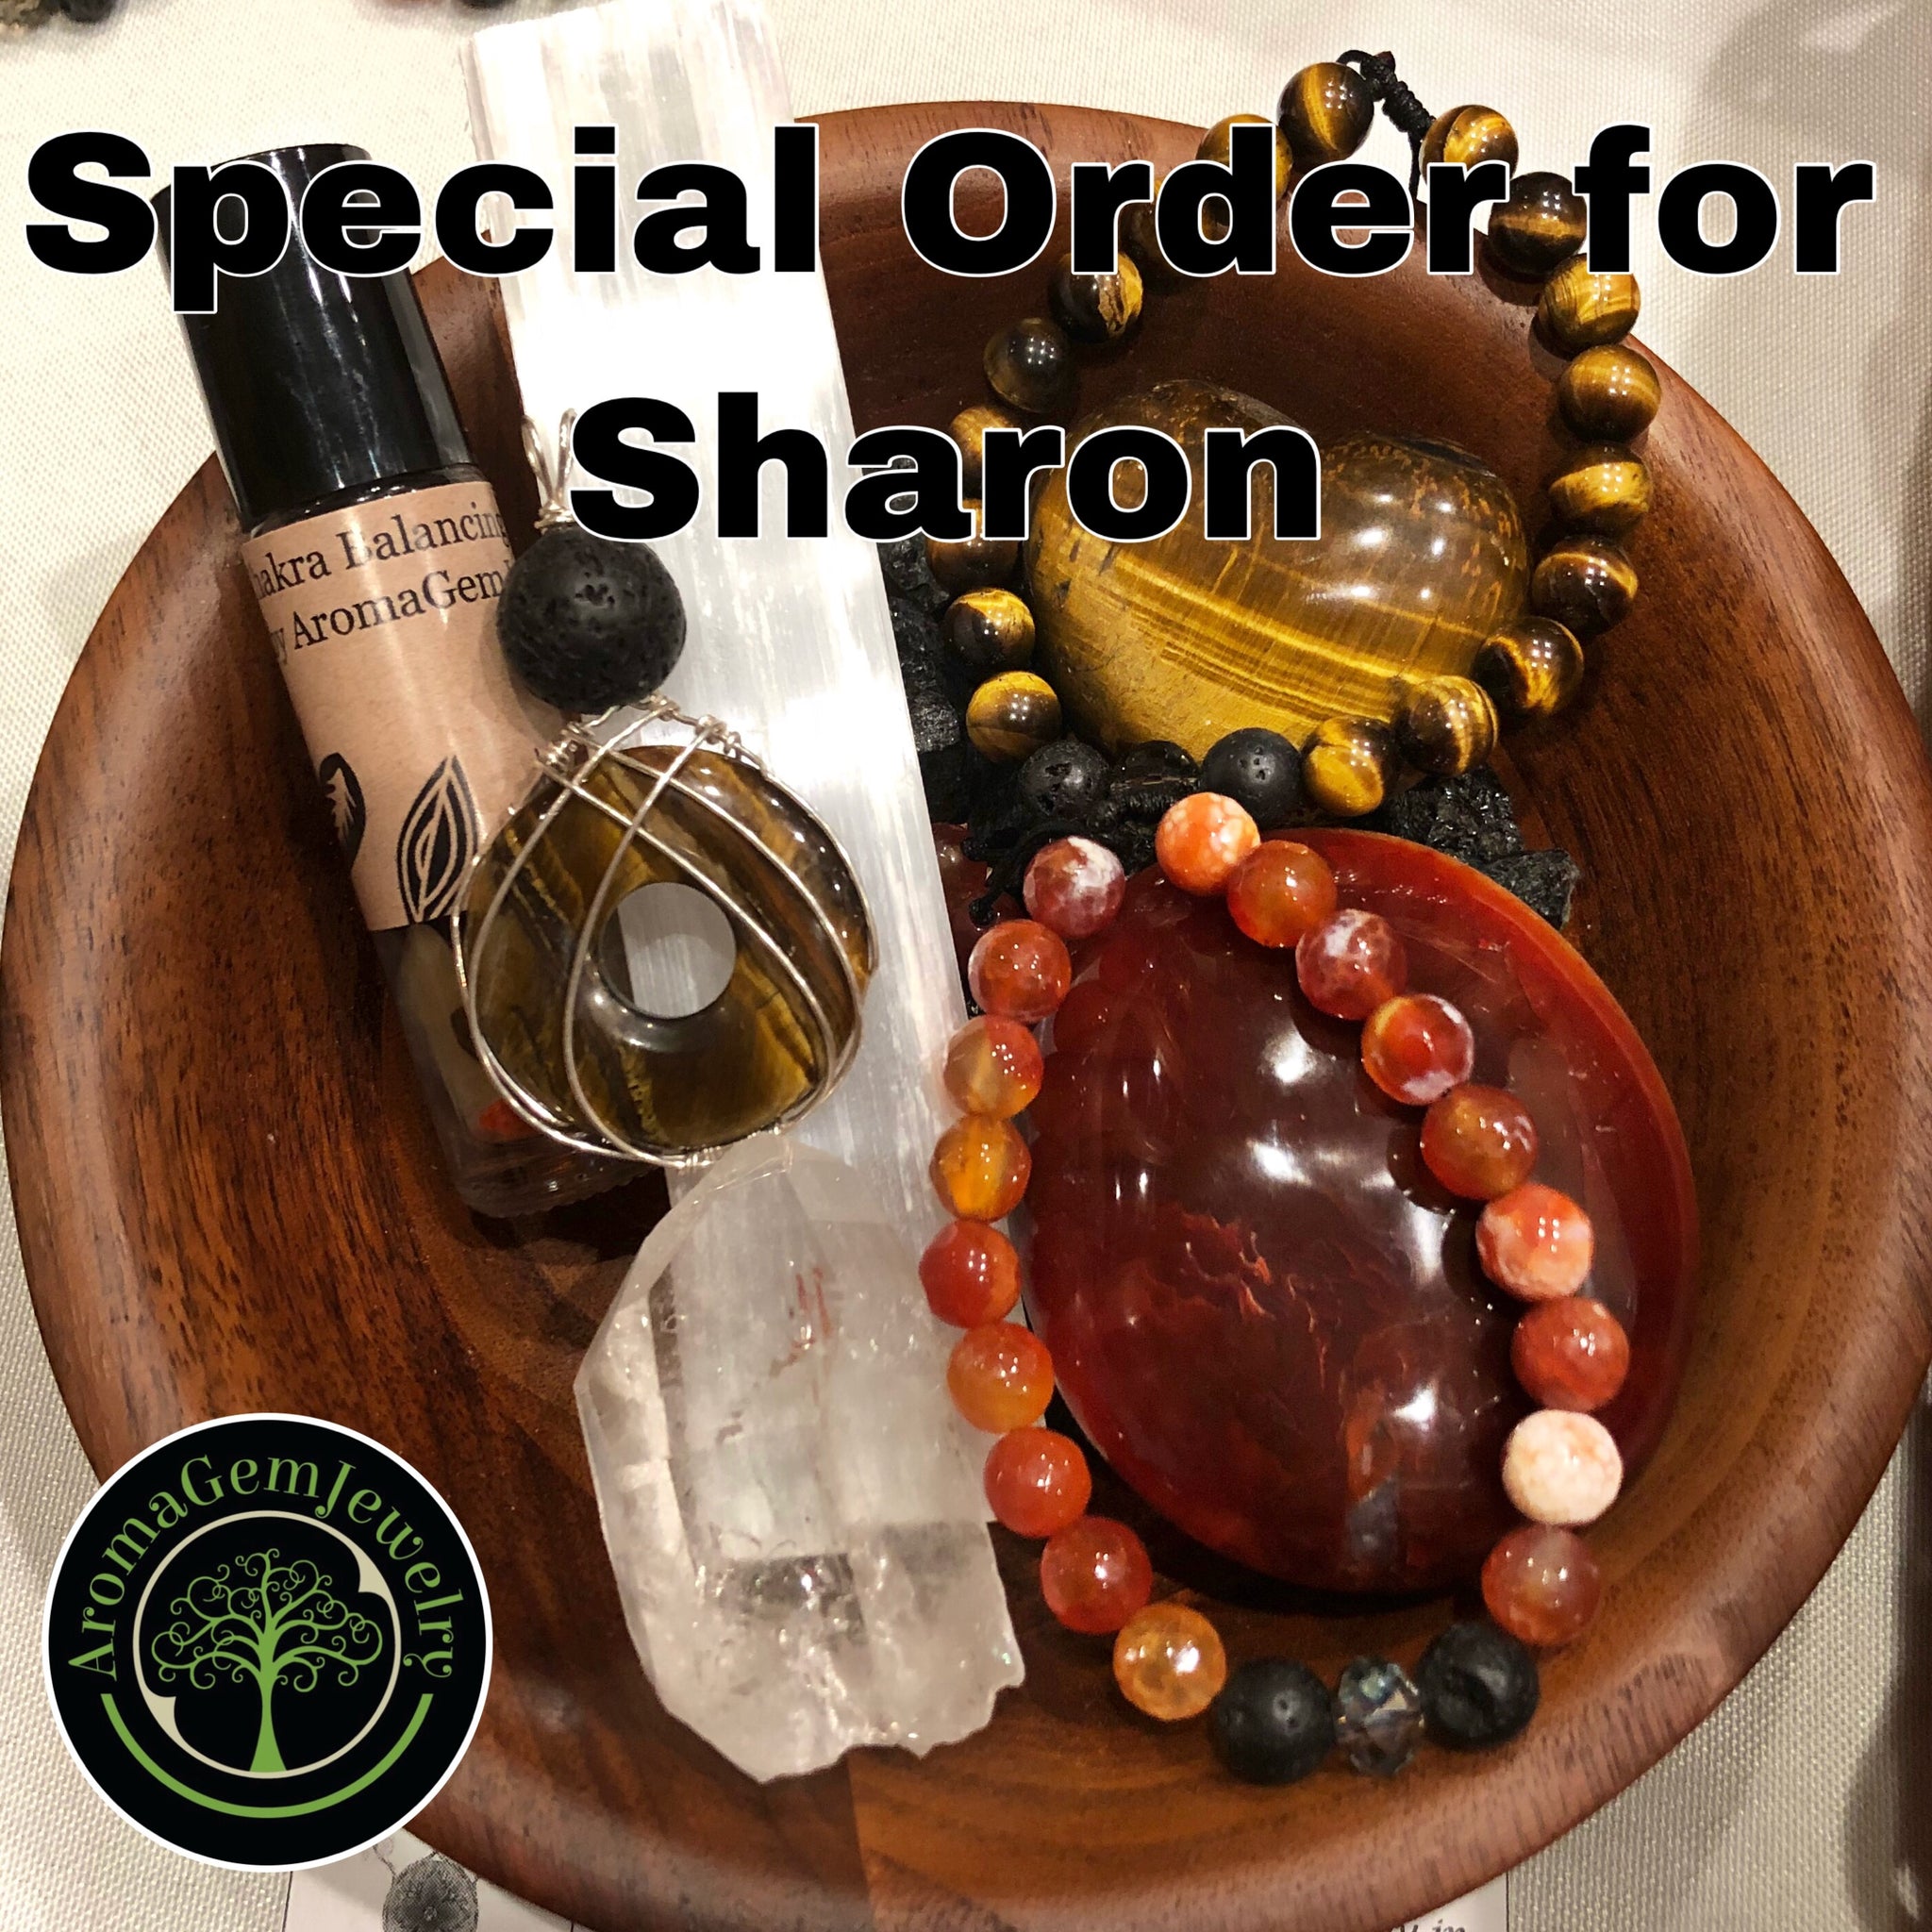 Special Order for Sharon